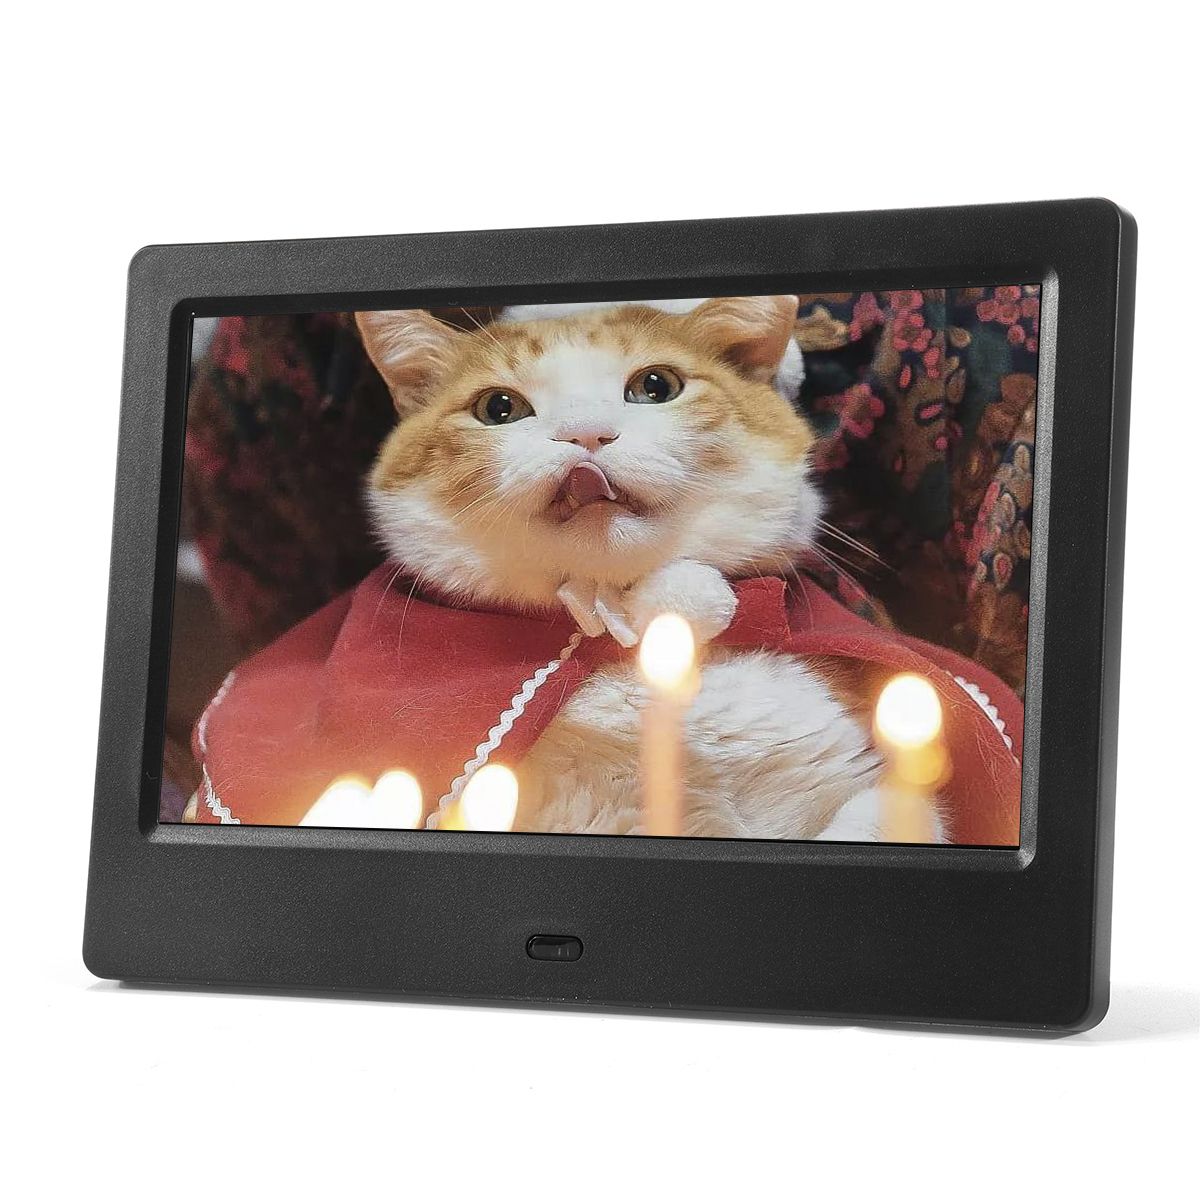 7-Inch-169-HD-Digital-Photo-Frame-Album-Holder-Stand-Home-Decor-with-Remote-Control-1557485